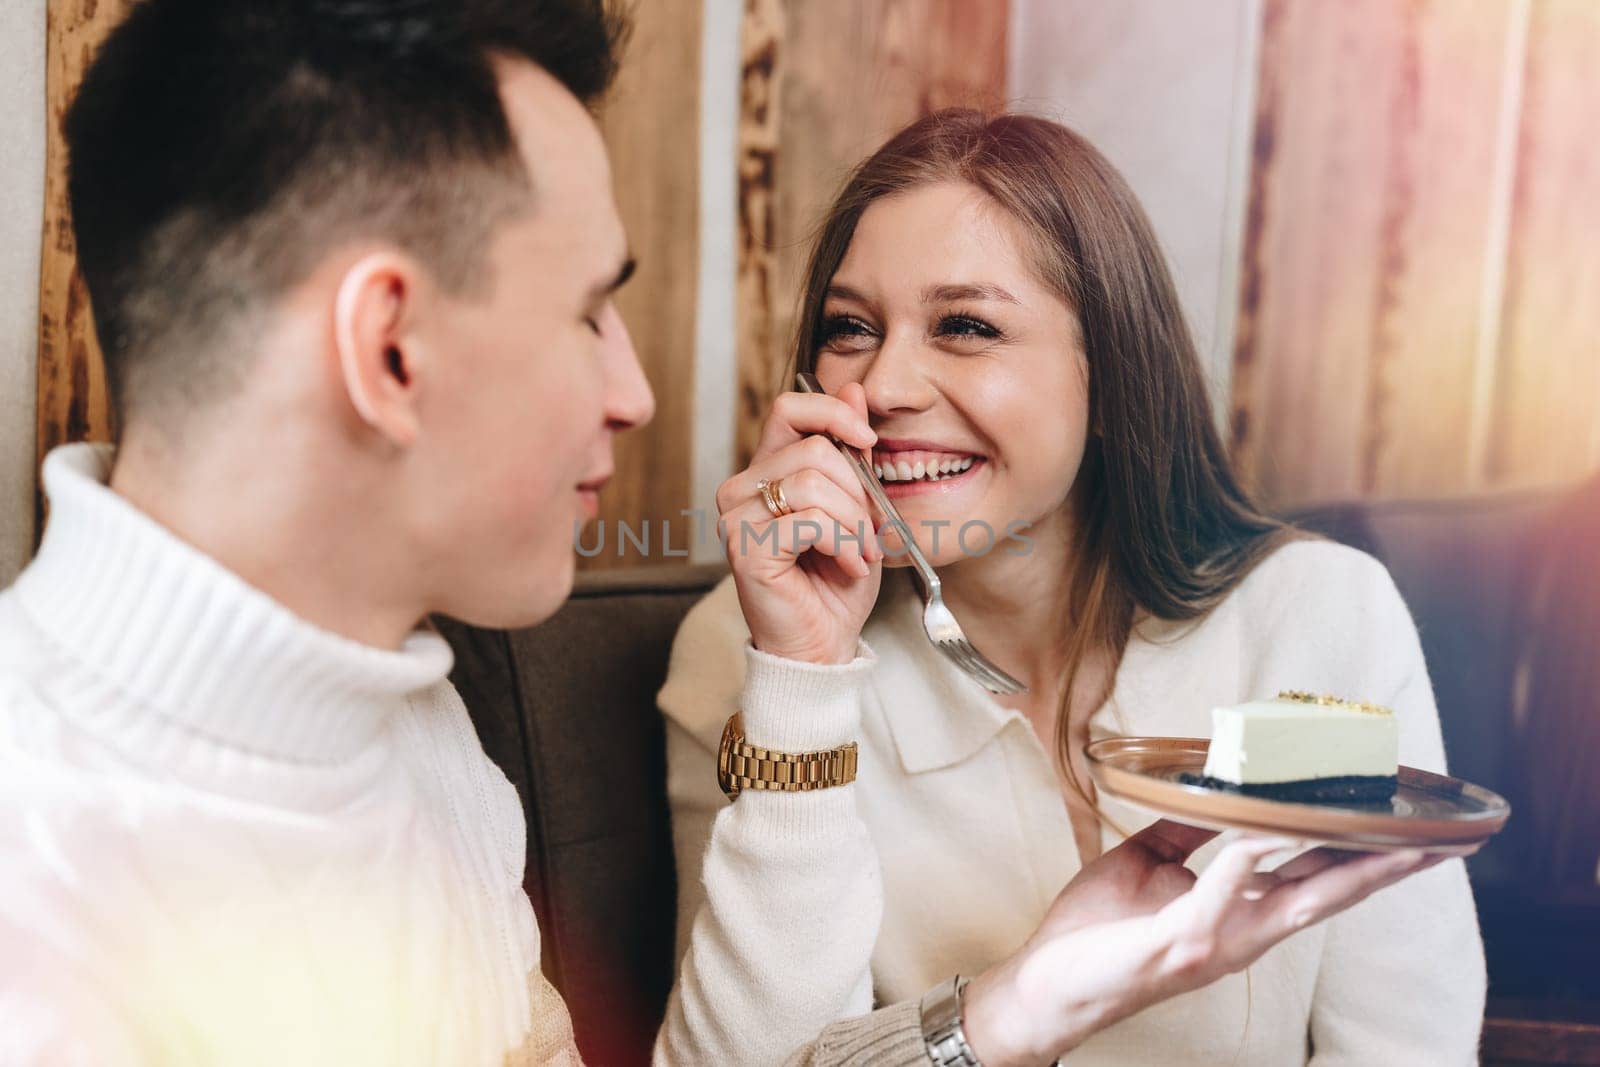 A cheerful young man, dressed in a white sweater, shares a delightful moment with his friend over a slice of cheesecake at a warm, inviting cafe. Their joyful interaction suggests a comfortable friendship as they savor the dessert together, surrounded by a wooden interior that adds to the cozy ambiance.